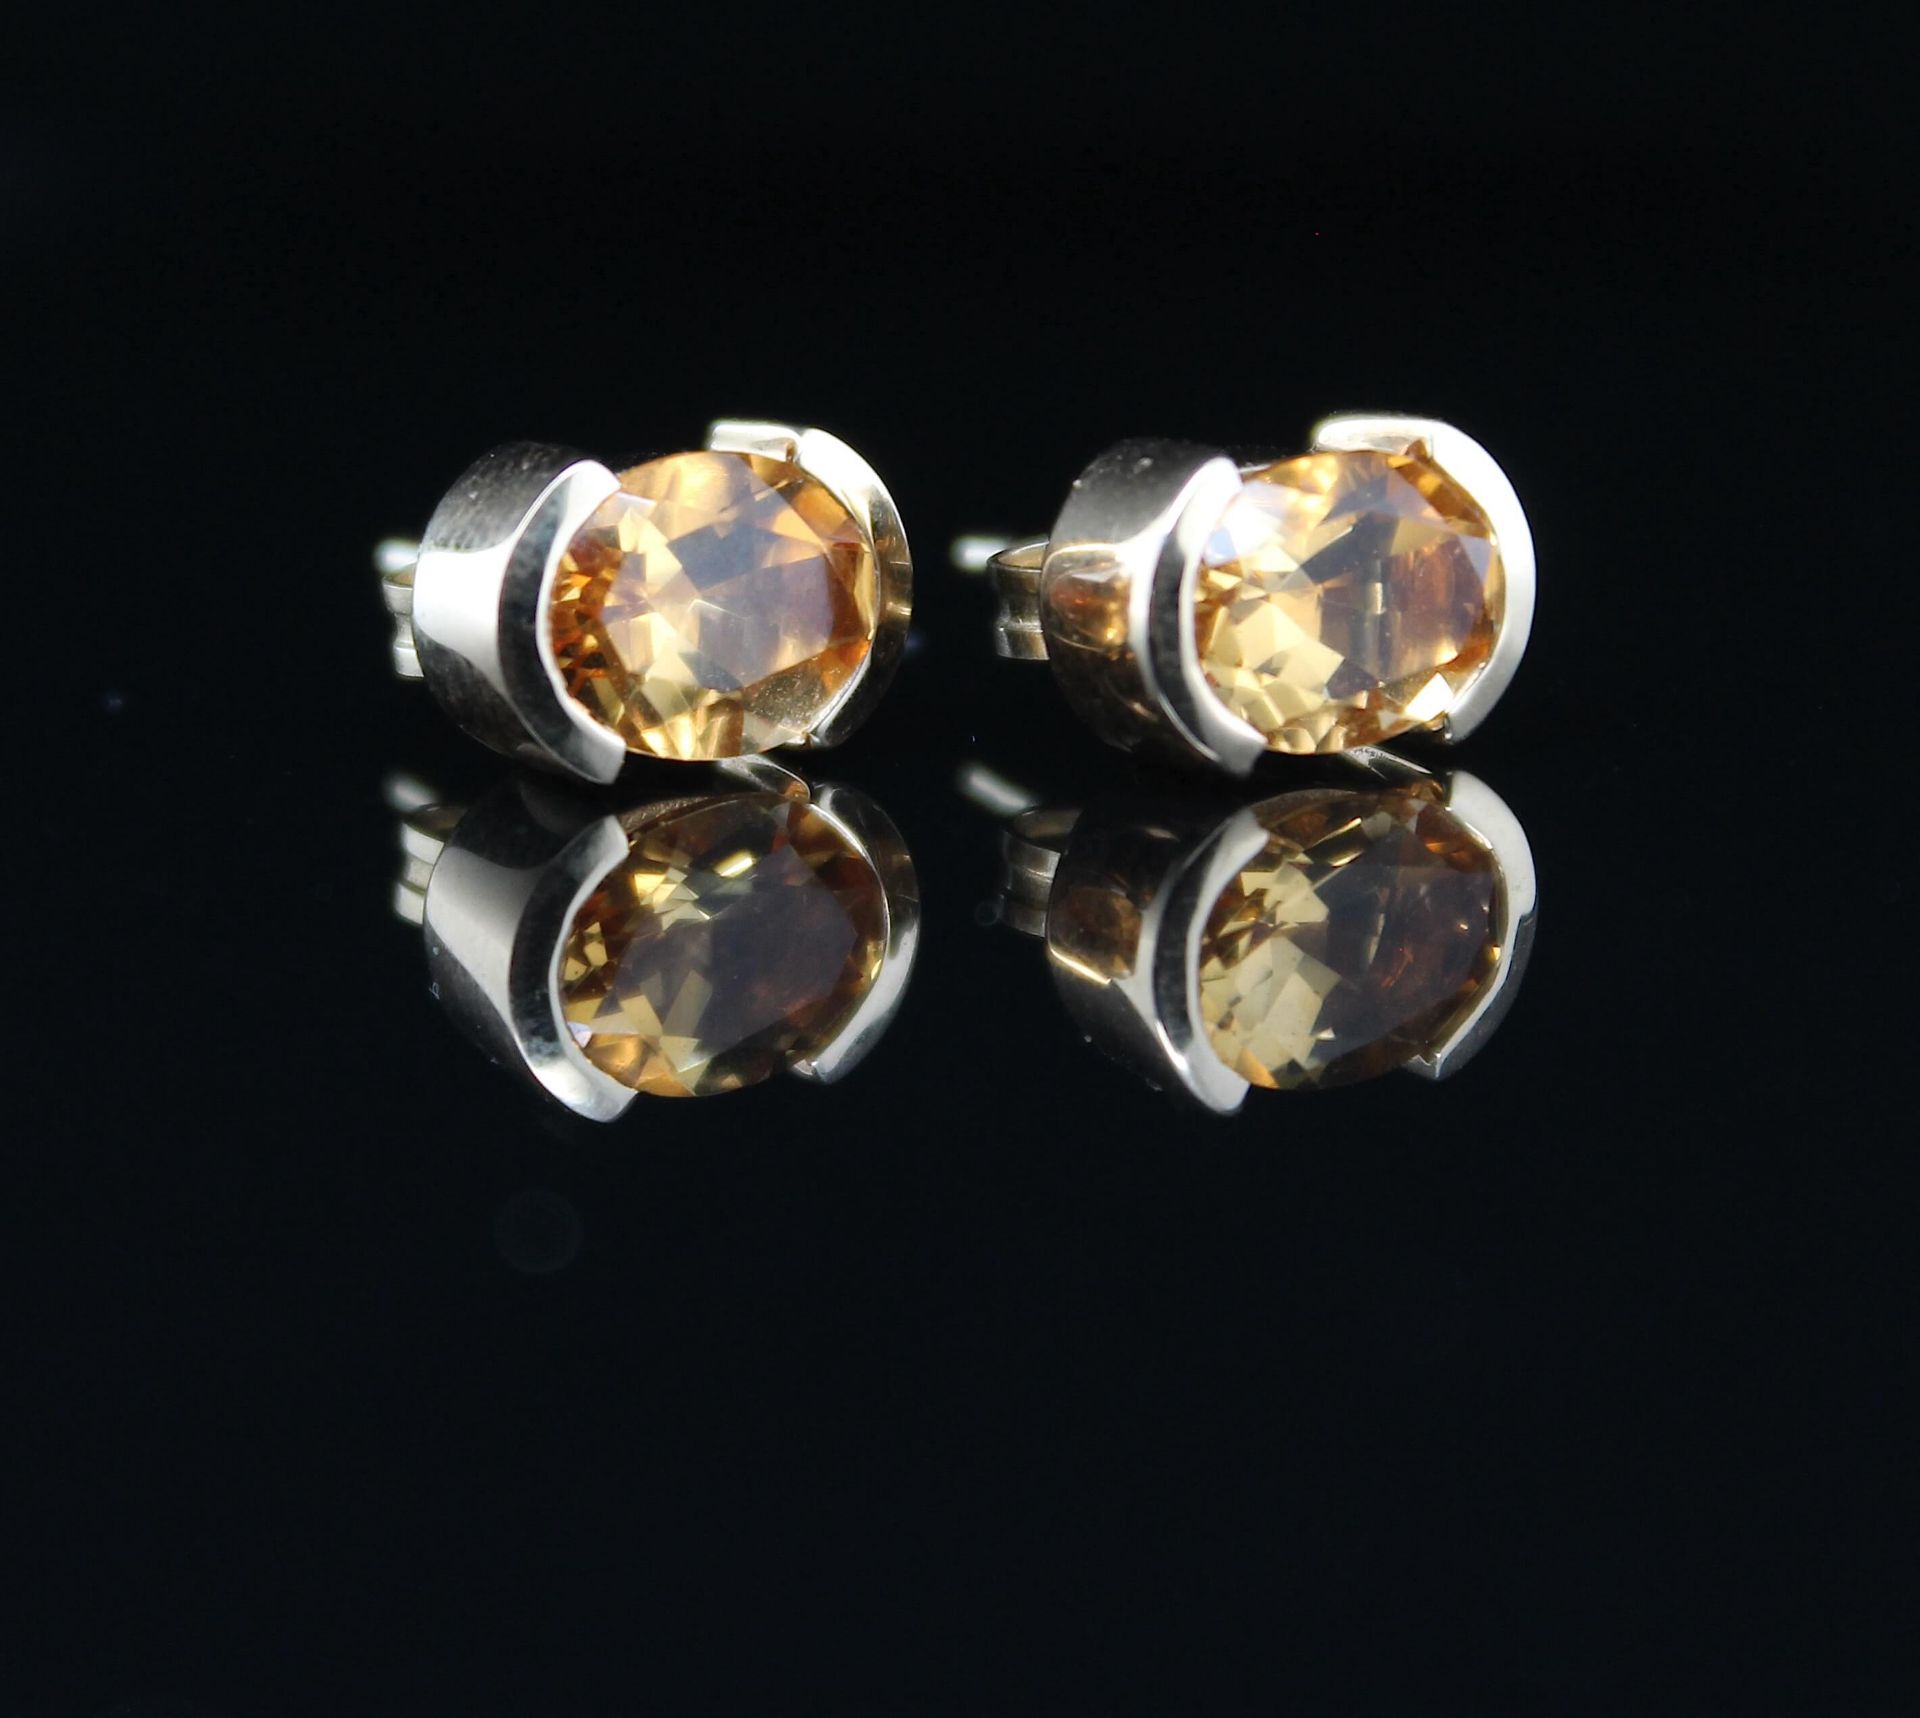 Christ ear studs with citrine - Image 2 of 2